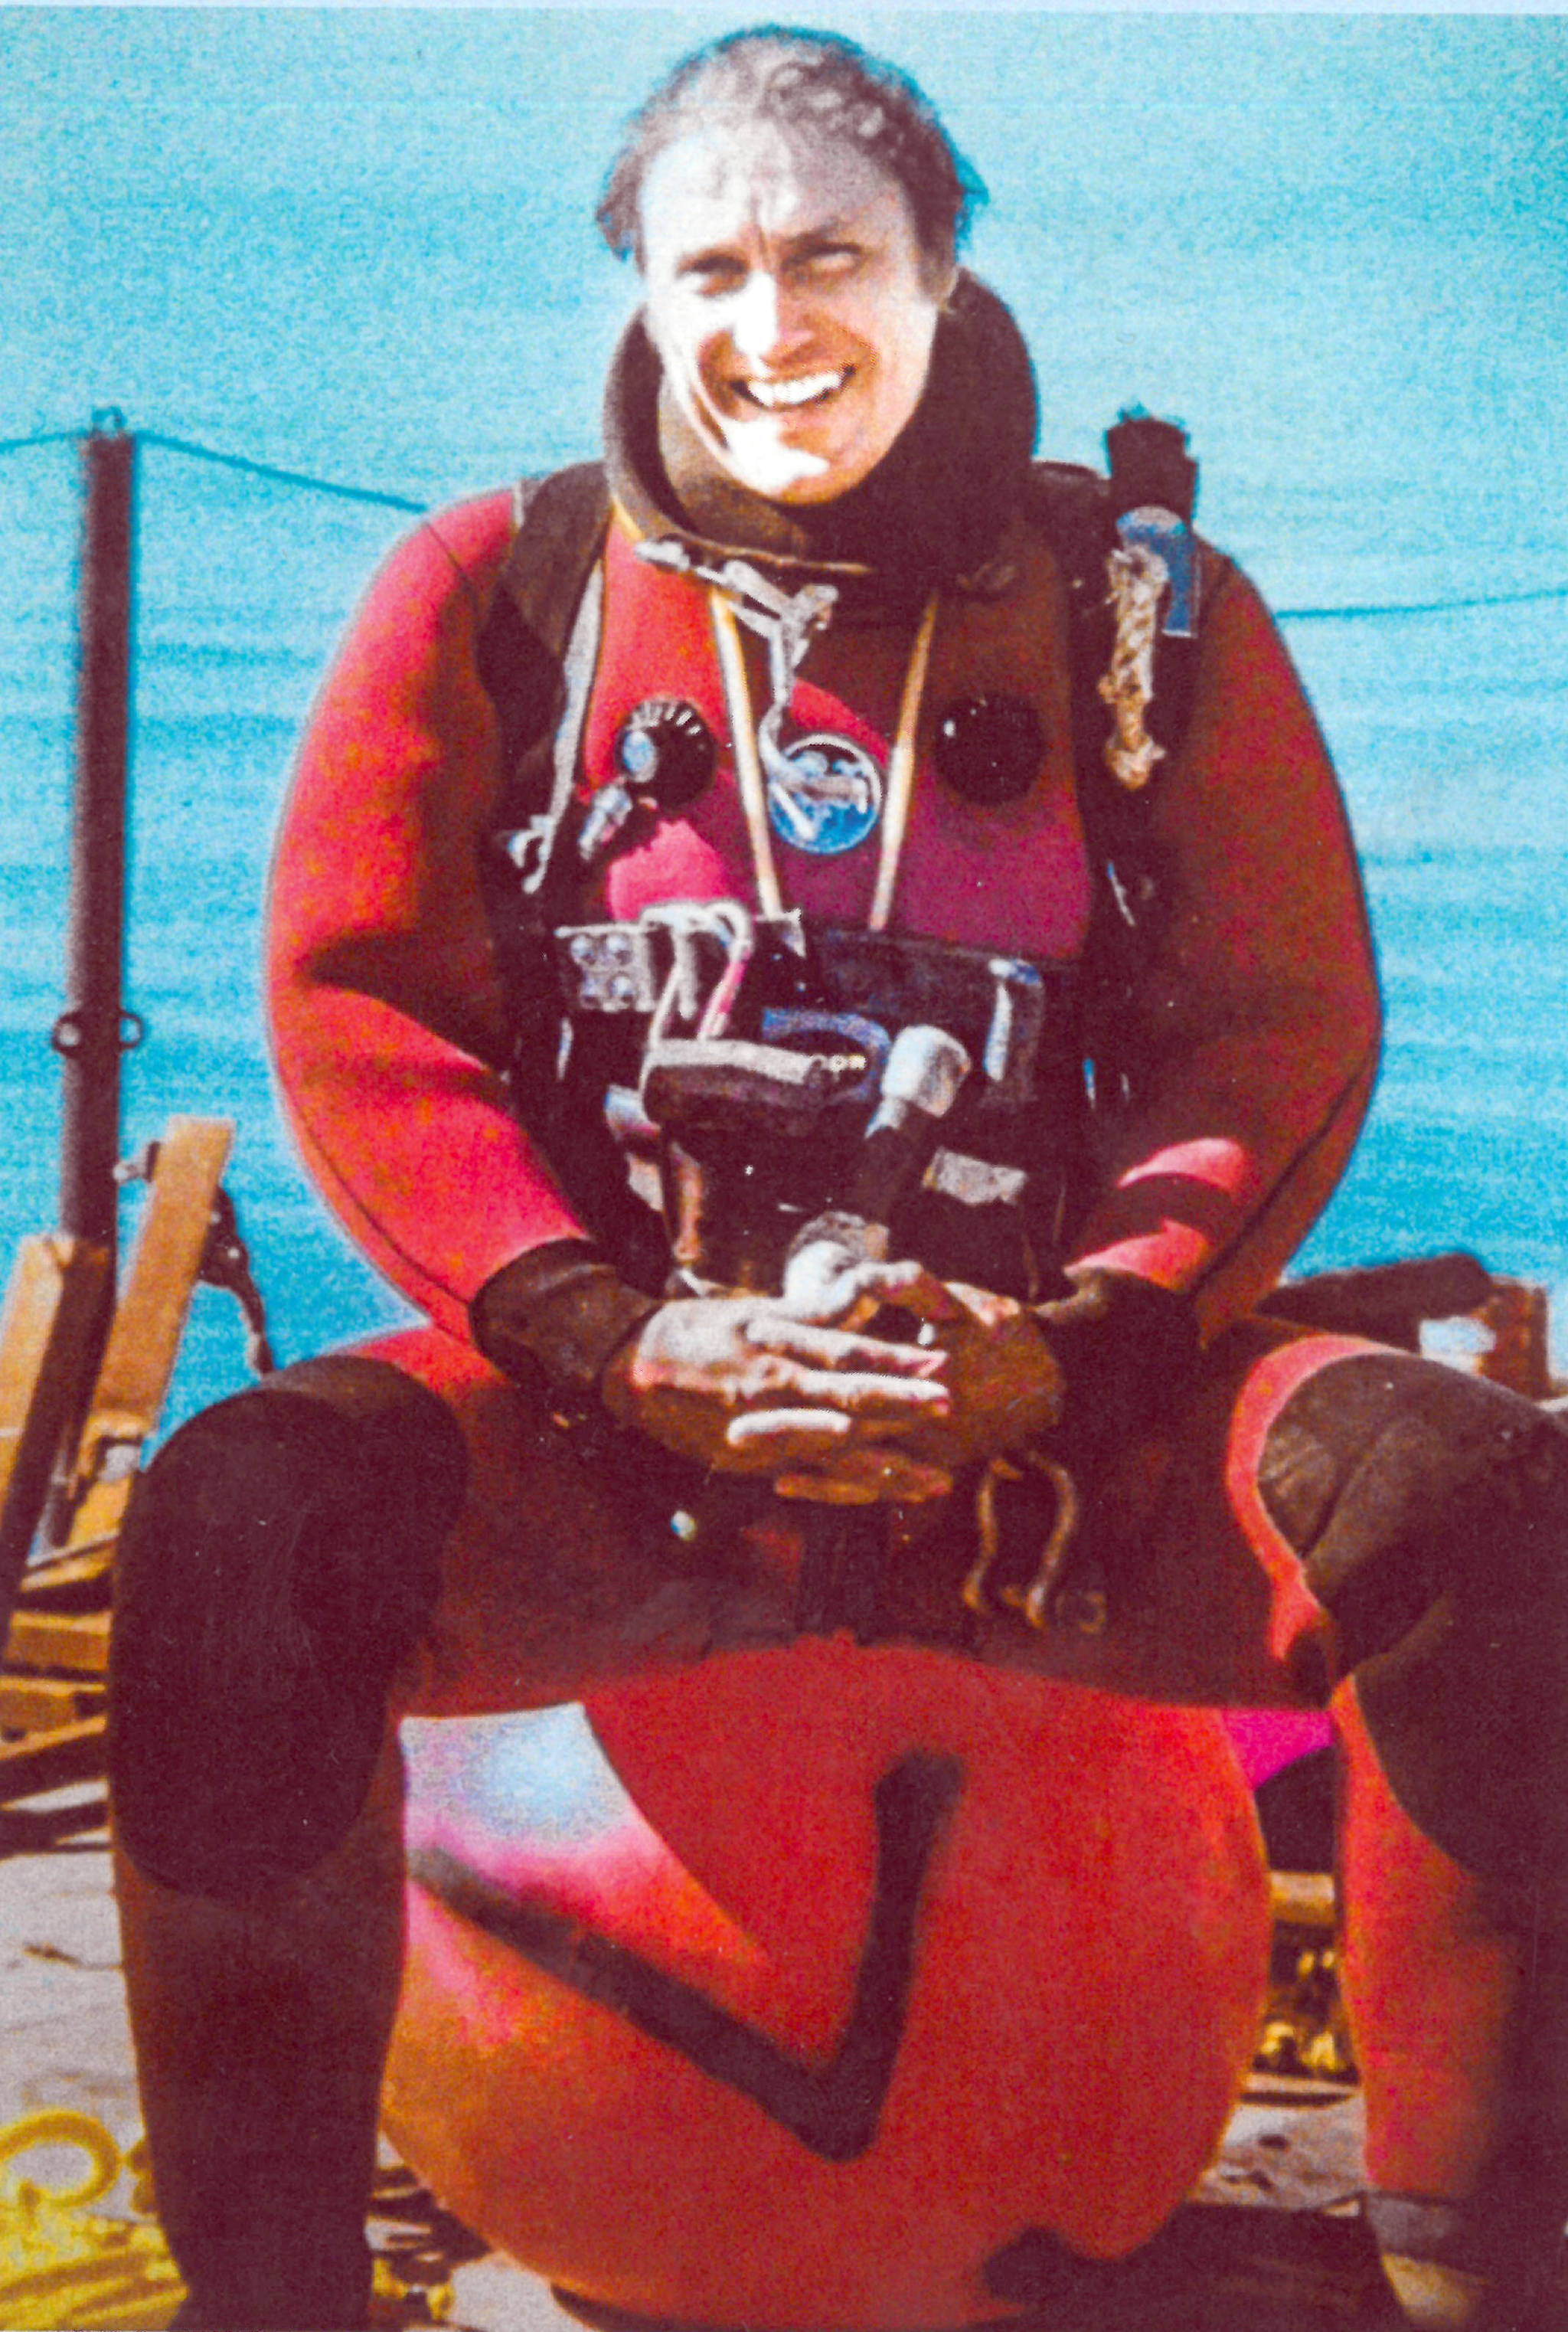 Owen Boyle, of Nikiski, is geared up for a dive on an oil platform in Cook Inlet sometime in the sixties. He worked as a commercial diver in the dangerous waters of Cook Inlet for 40 years and was inducted into the Association of Diving Contractors International Hall of Fame this February. (Photo courtesy Owen Boyle)